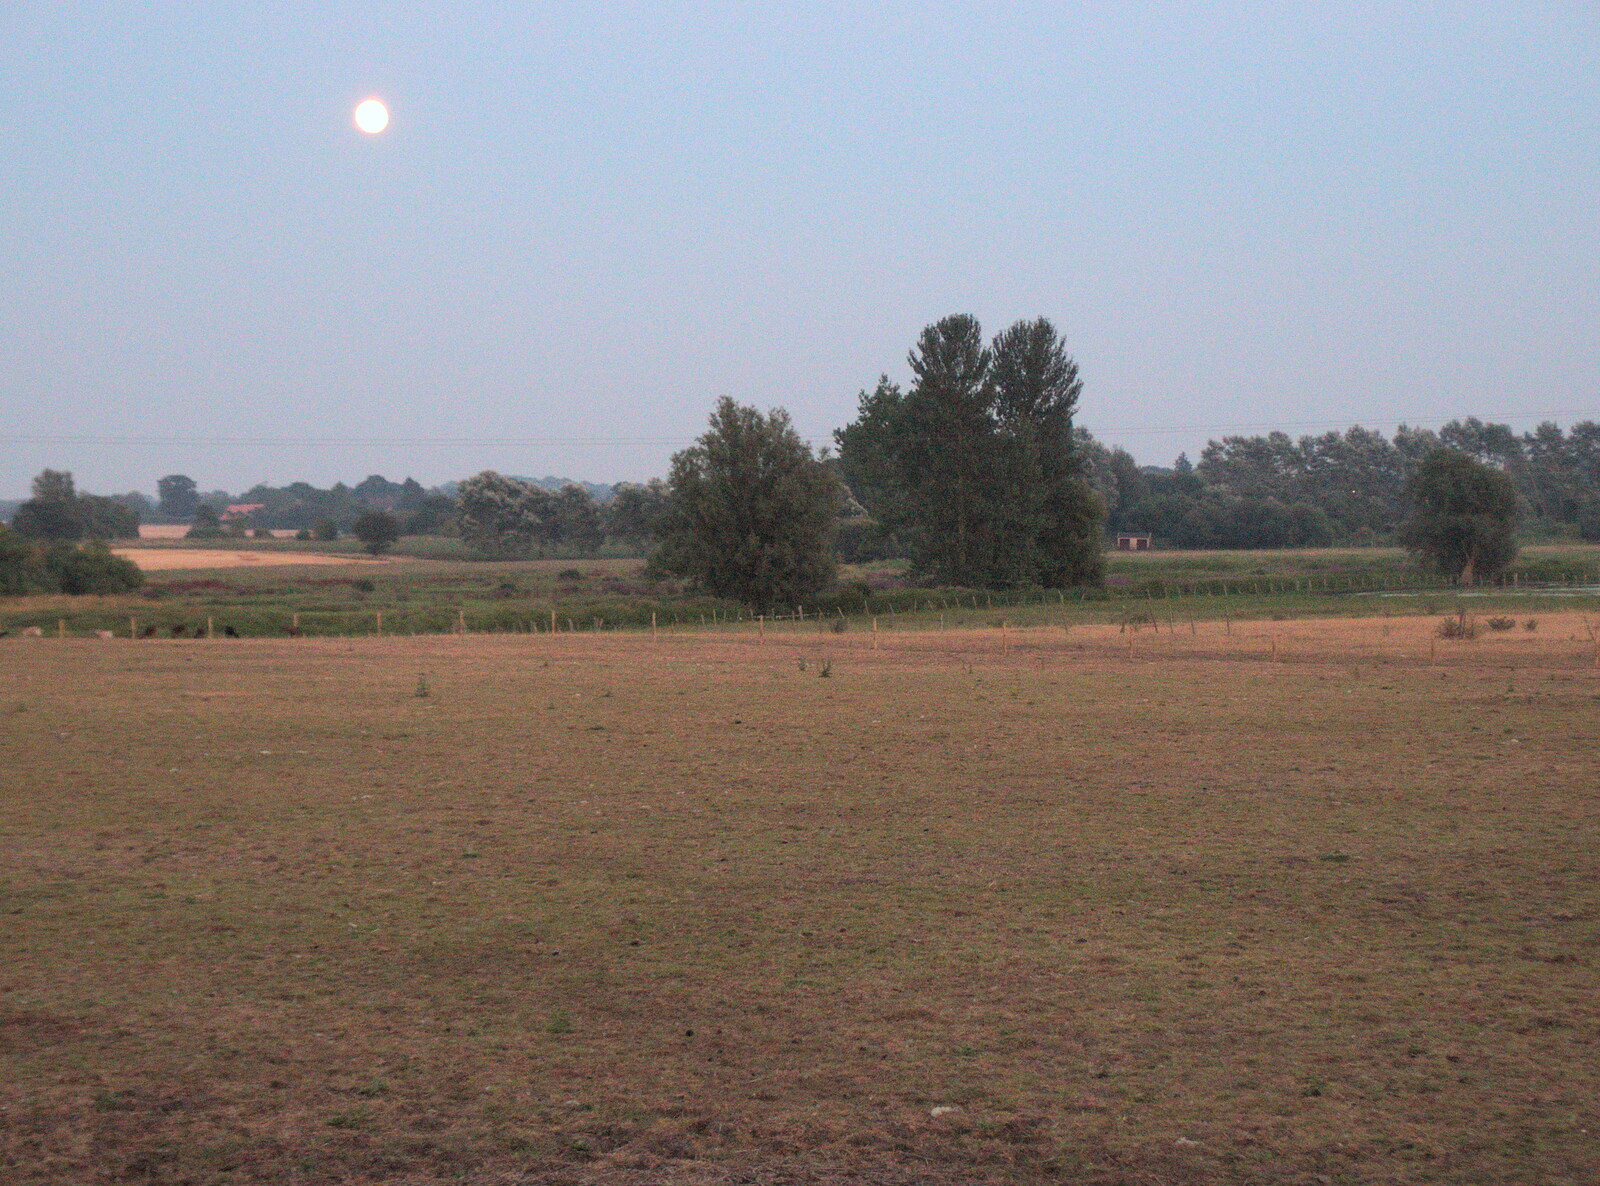 Moonlight over the meadows near Brockdish from The BSCC at The Crown and Hot Summer Days, Diss, Pulham and London - 24th July 2018